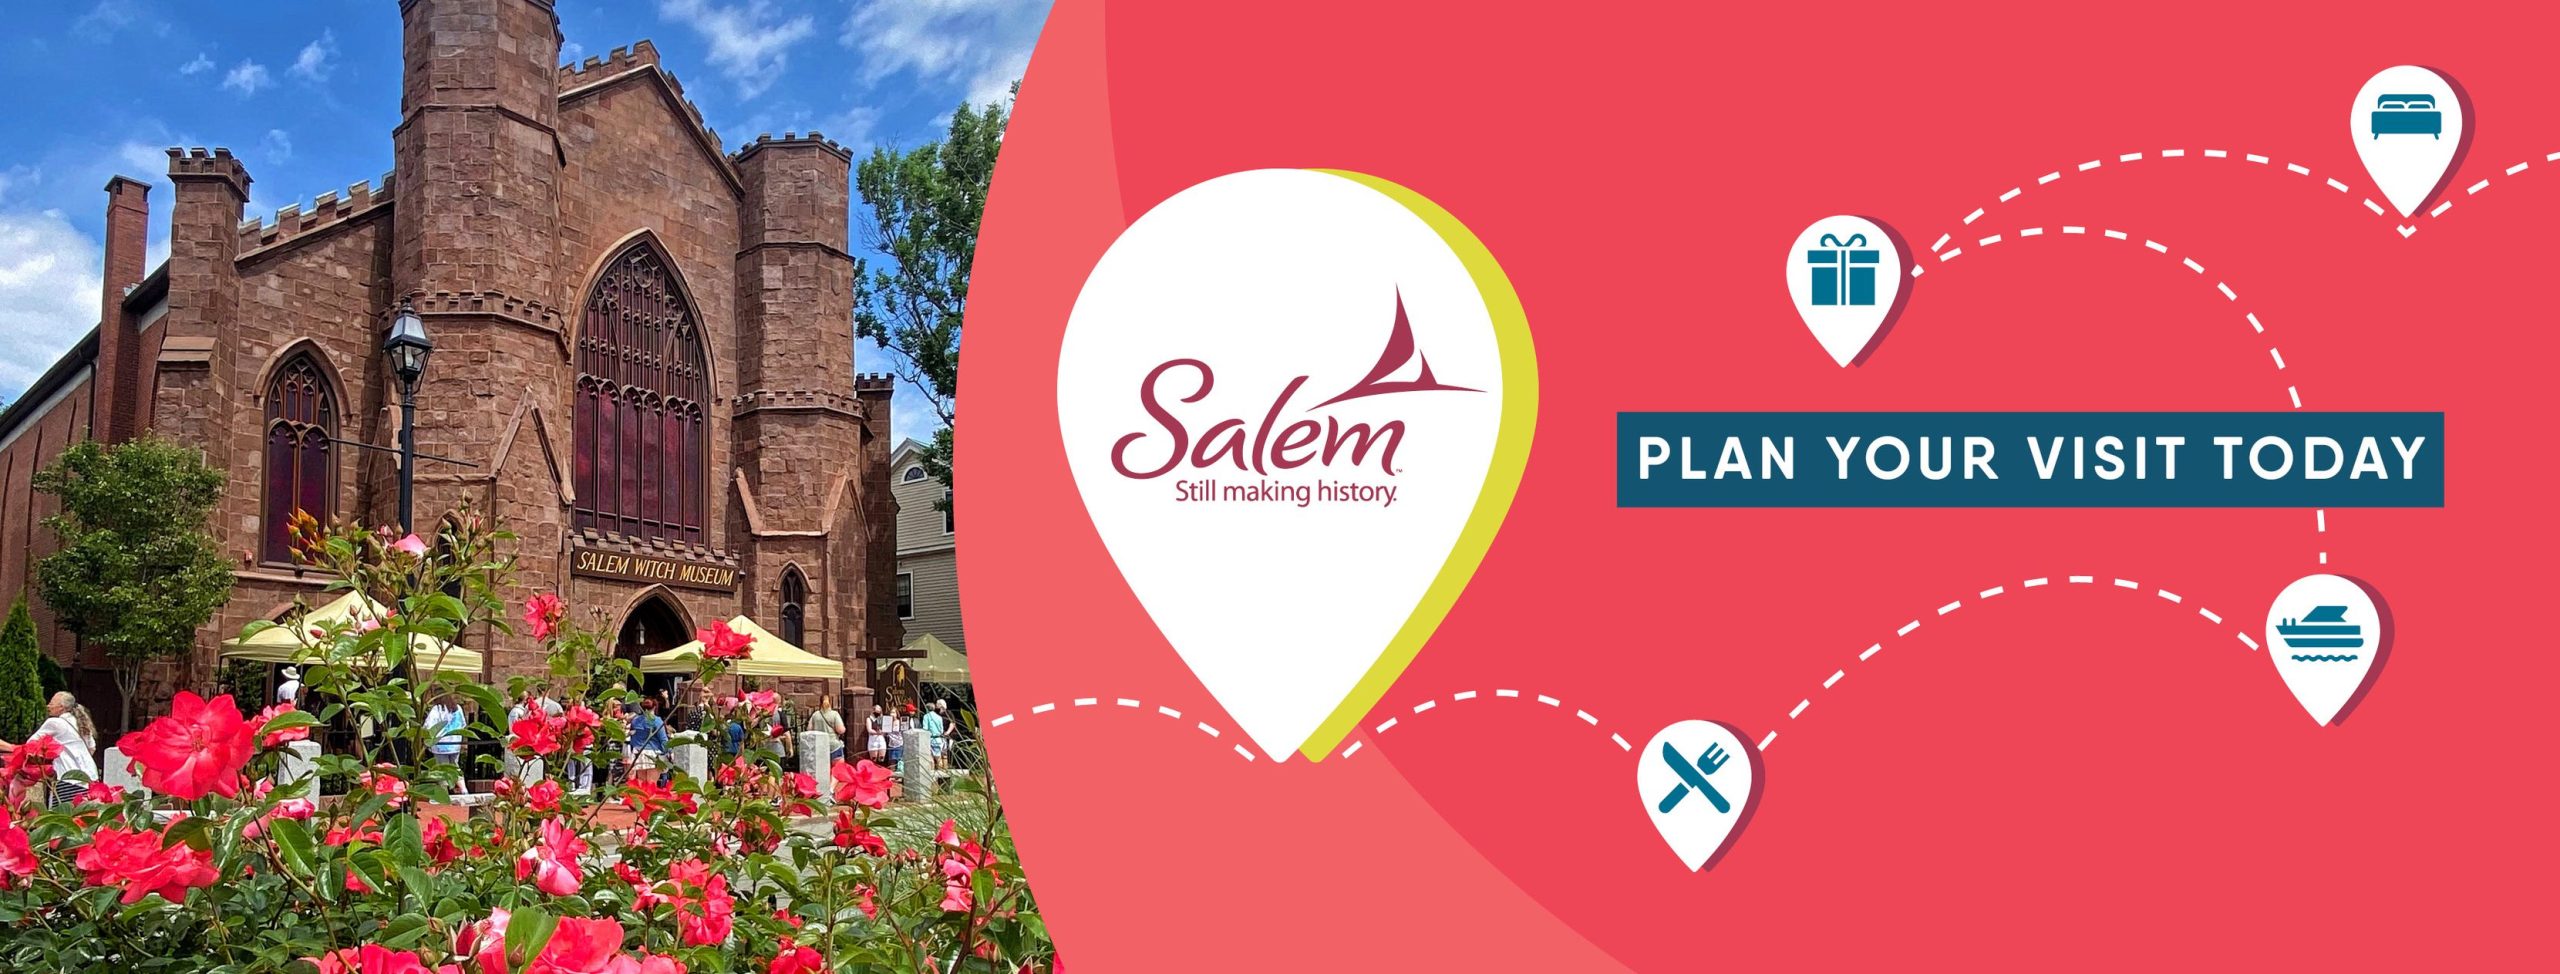 a building with a sign that says salem plan your visit today.